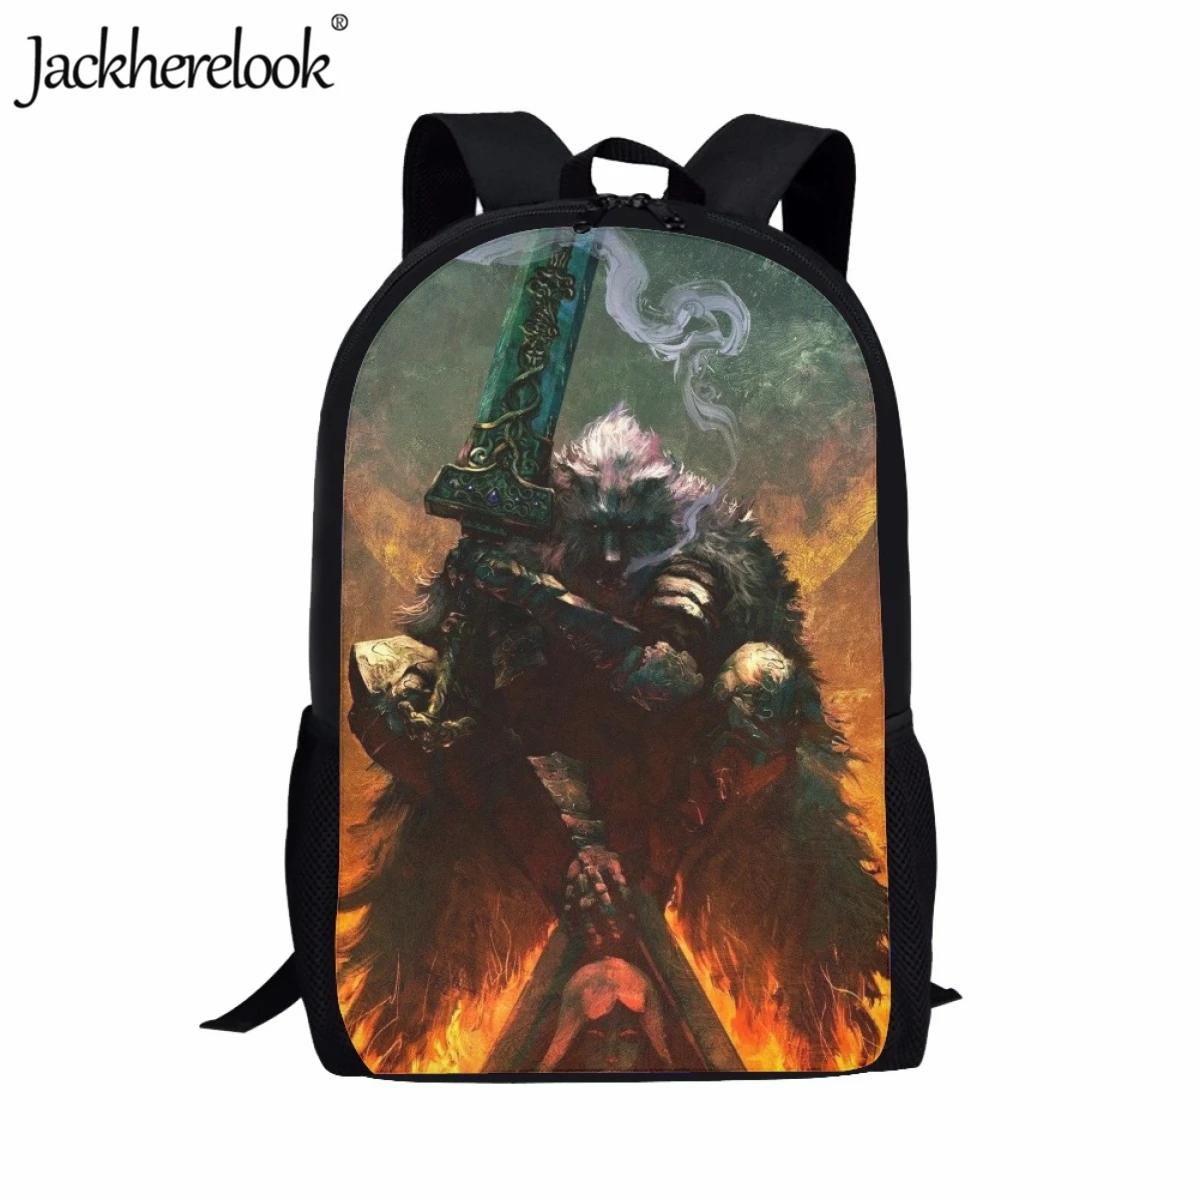 

Jackherelook Game Dark Soul Anime Backpack for Teen Kids Fashion Trend New School Bag Student Casual Daily Practical Book Bags